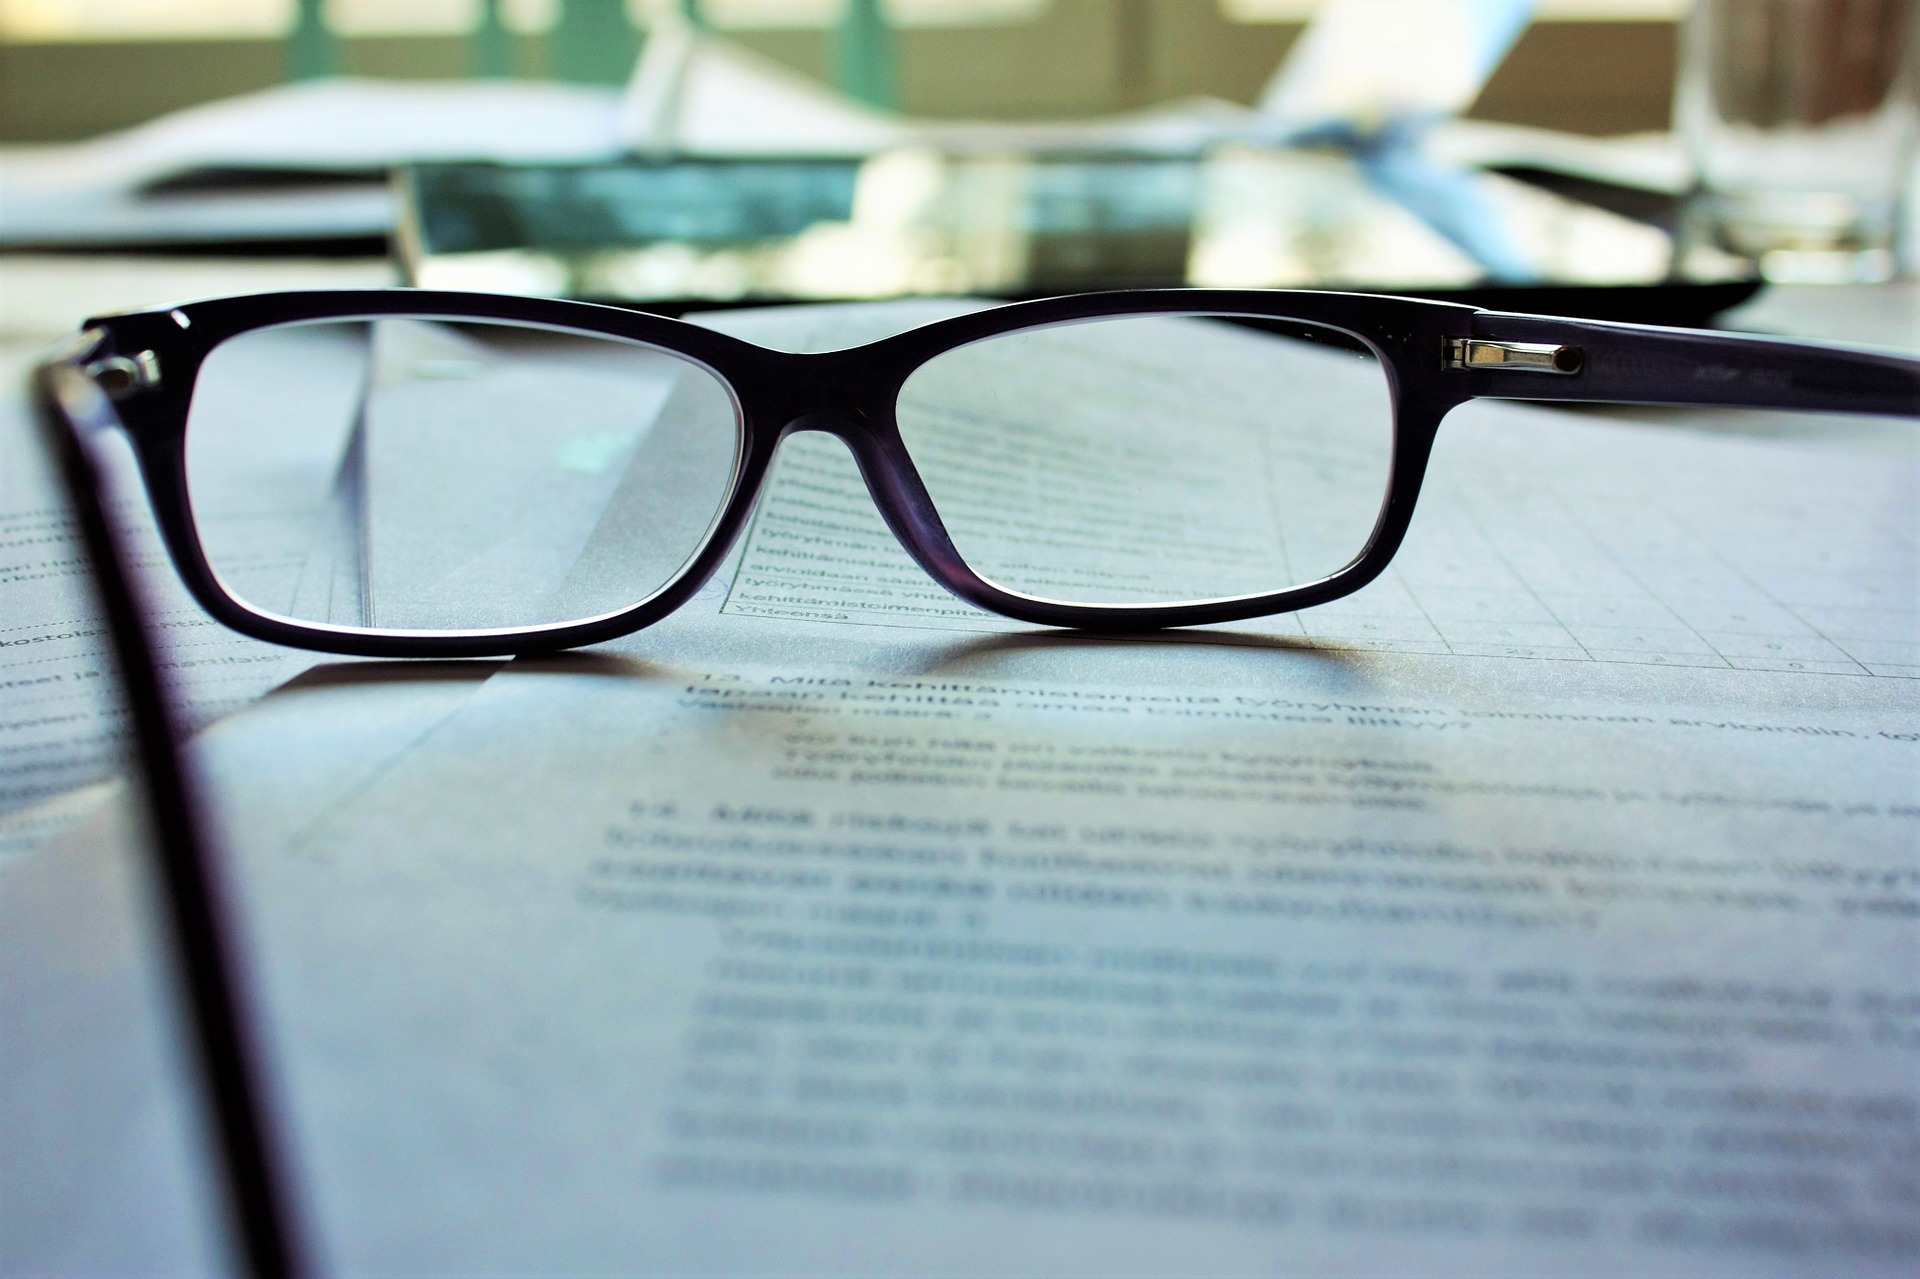 Pair of glasses on top of document